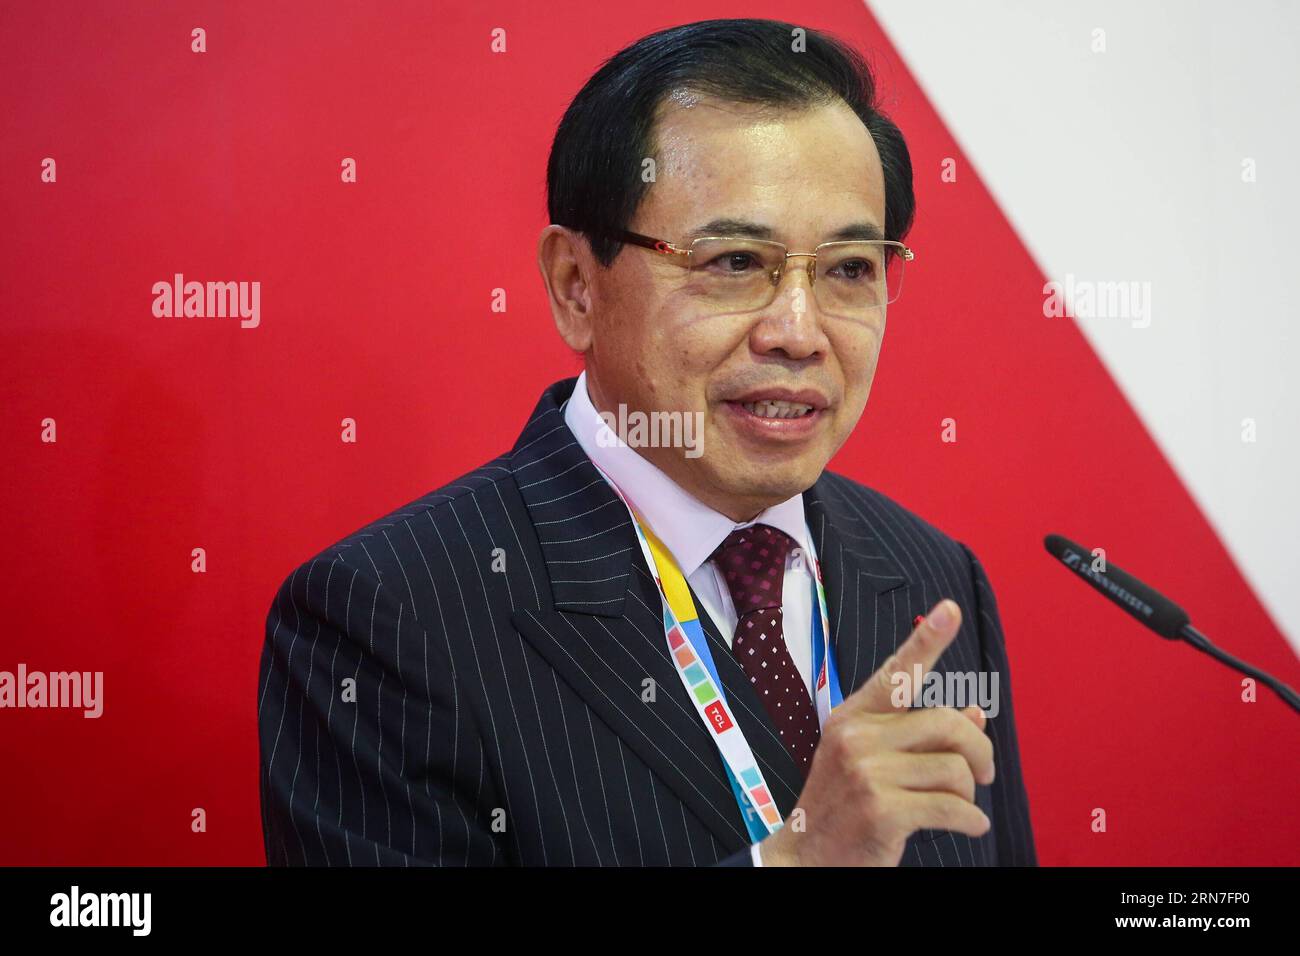 (150904) -- BERLIN, Sept. 4, 2015 -- Li Dongsheng, Chairman of TCL Cooperation, speaks during the opening ceremony of China Brand Show at the 55th IFA consumer electronics fair in Berlin, Germany, on Sept. 4, 2015. More than 150 exhibitors from China would present their latest products at this year s IFA consumer electronics fair, Europe s largest consumer electronics and home appliances fair, which kicked off on Friday in Berlin. ) GERMANY-BERLIN-IFA CONSUMER ELECTRONICS FAIR-CHINA-EXHIBITORS ZhangxFan PUBLICATIONxNOTxINxCHN   150904 Berlin Sept 4 2015 left Dongsheng Chairman of TCL Cooperati Stock Photo